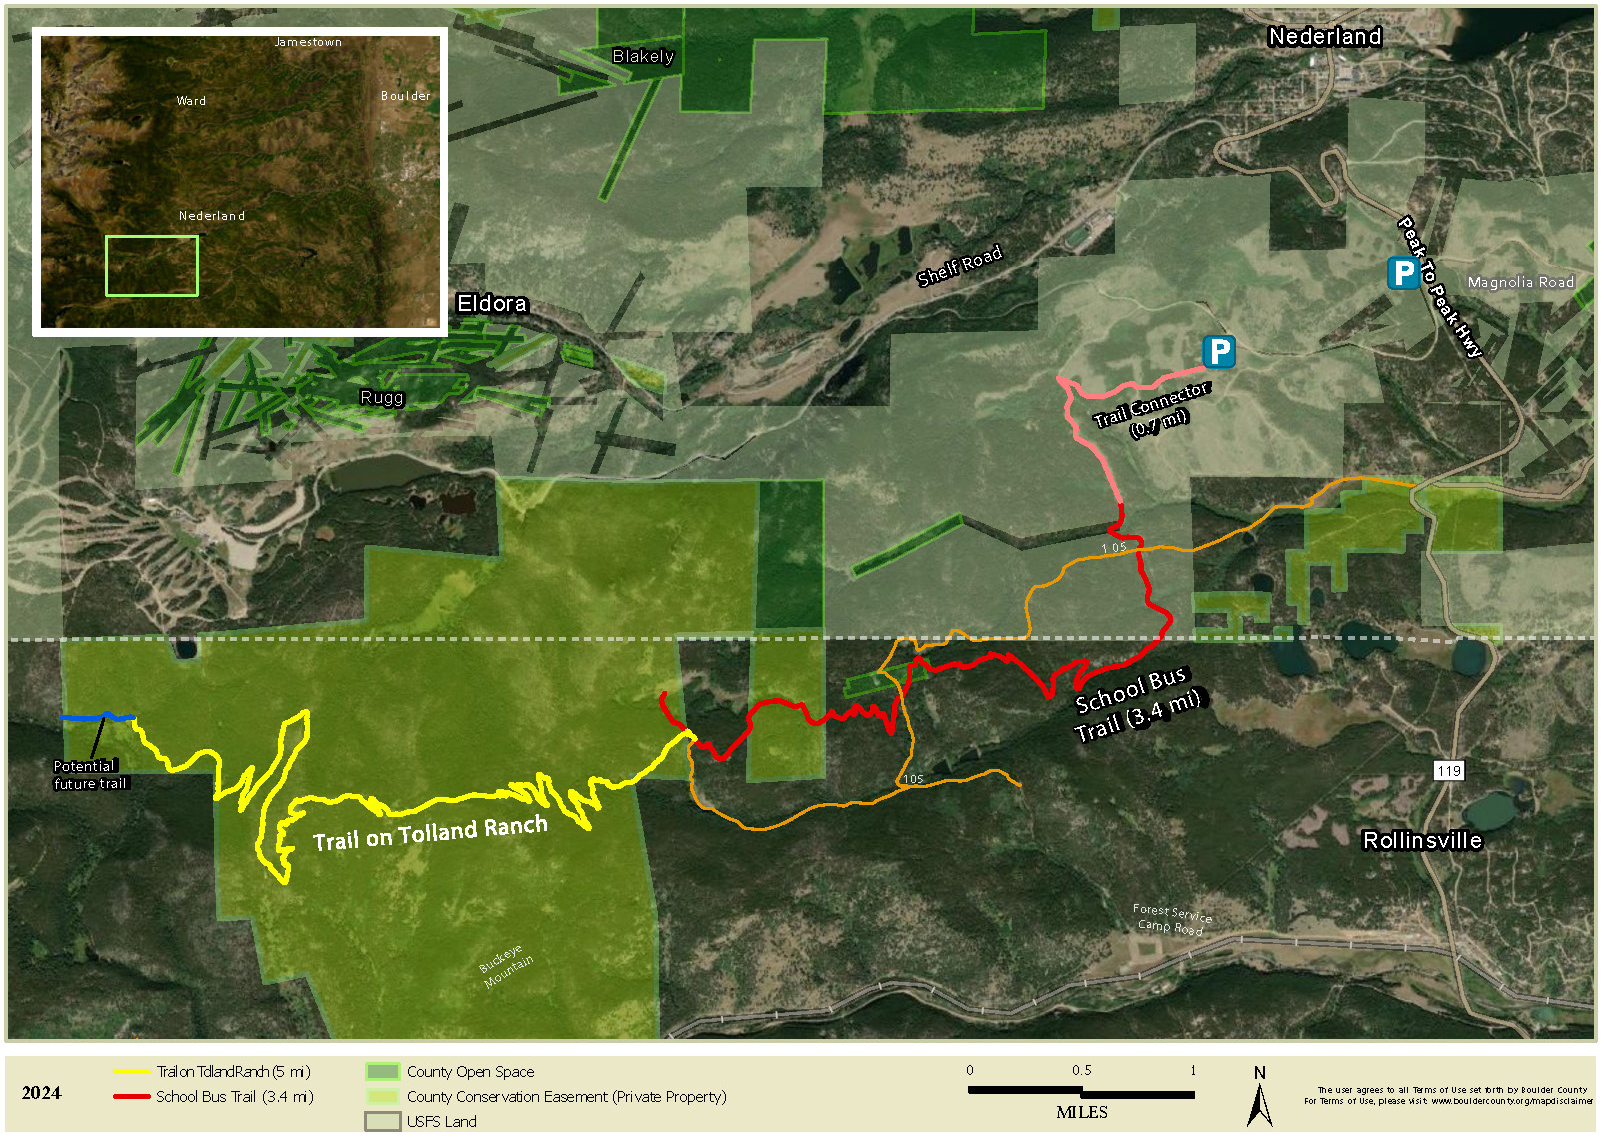 Map showing the trail on Tolland Ranch